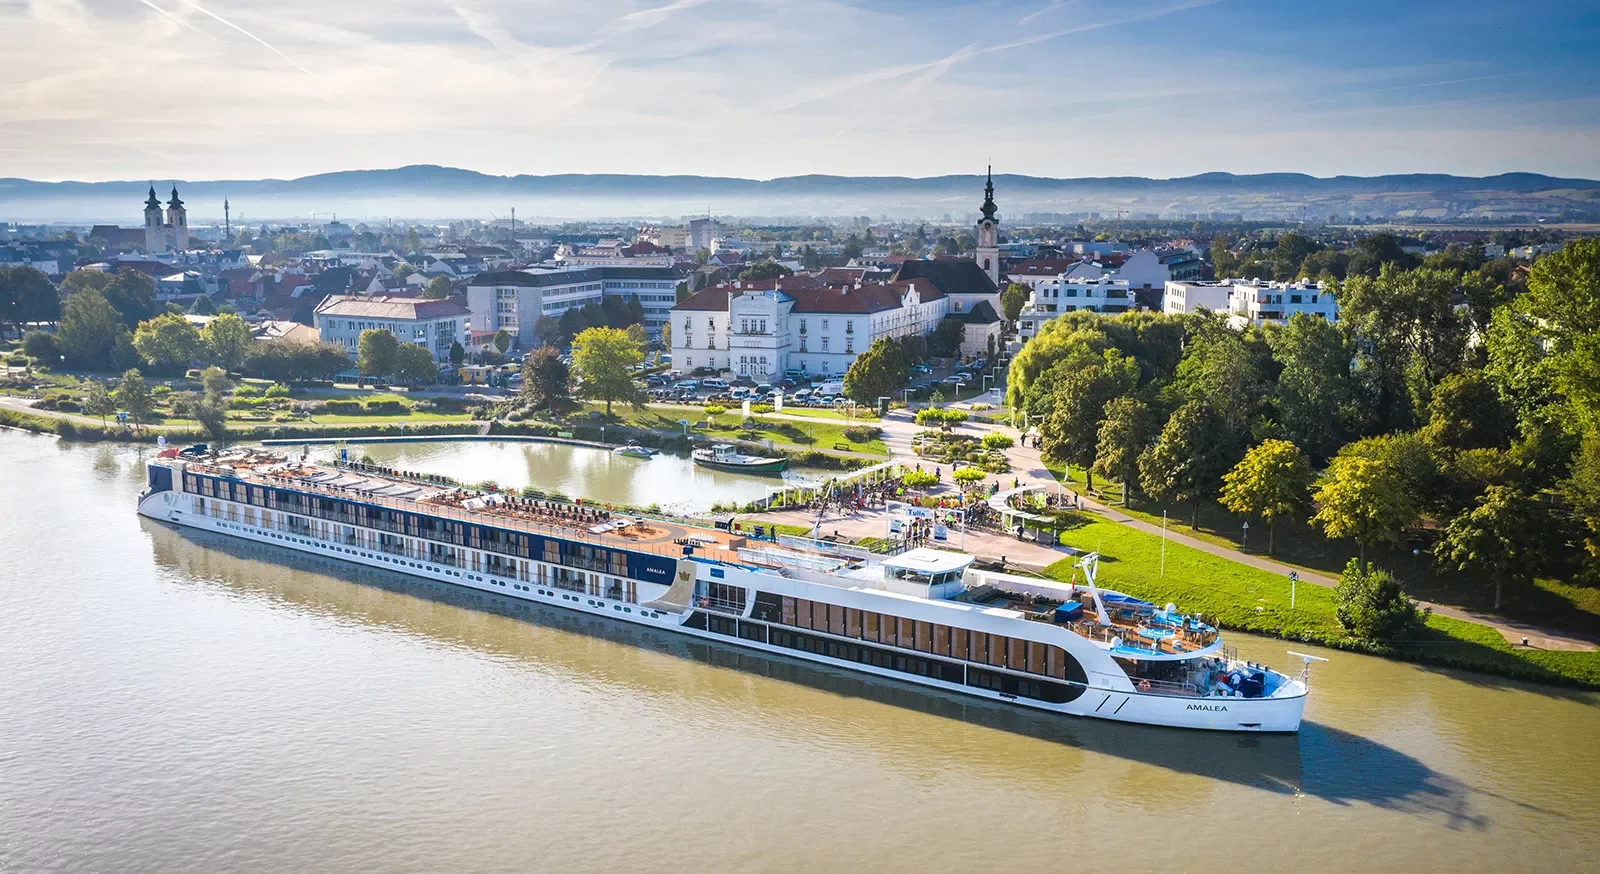 Aerial view of the AmaLea cruise ship on the Danube river.